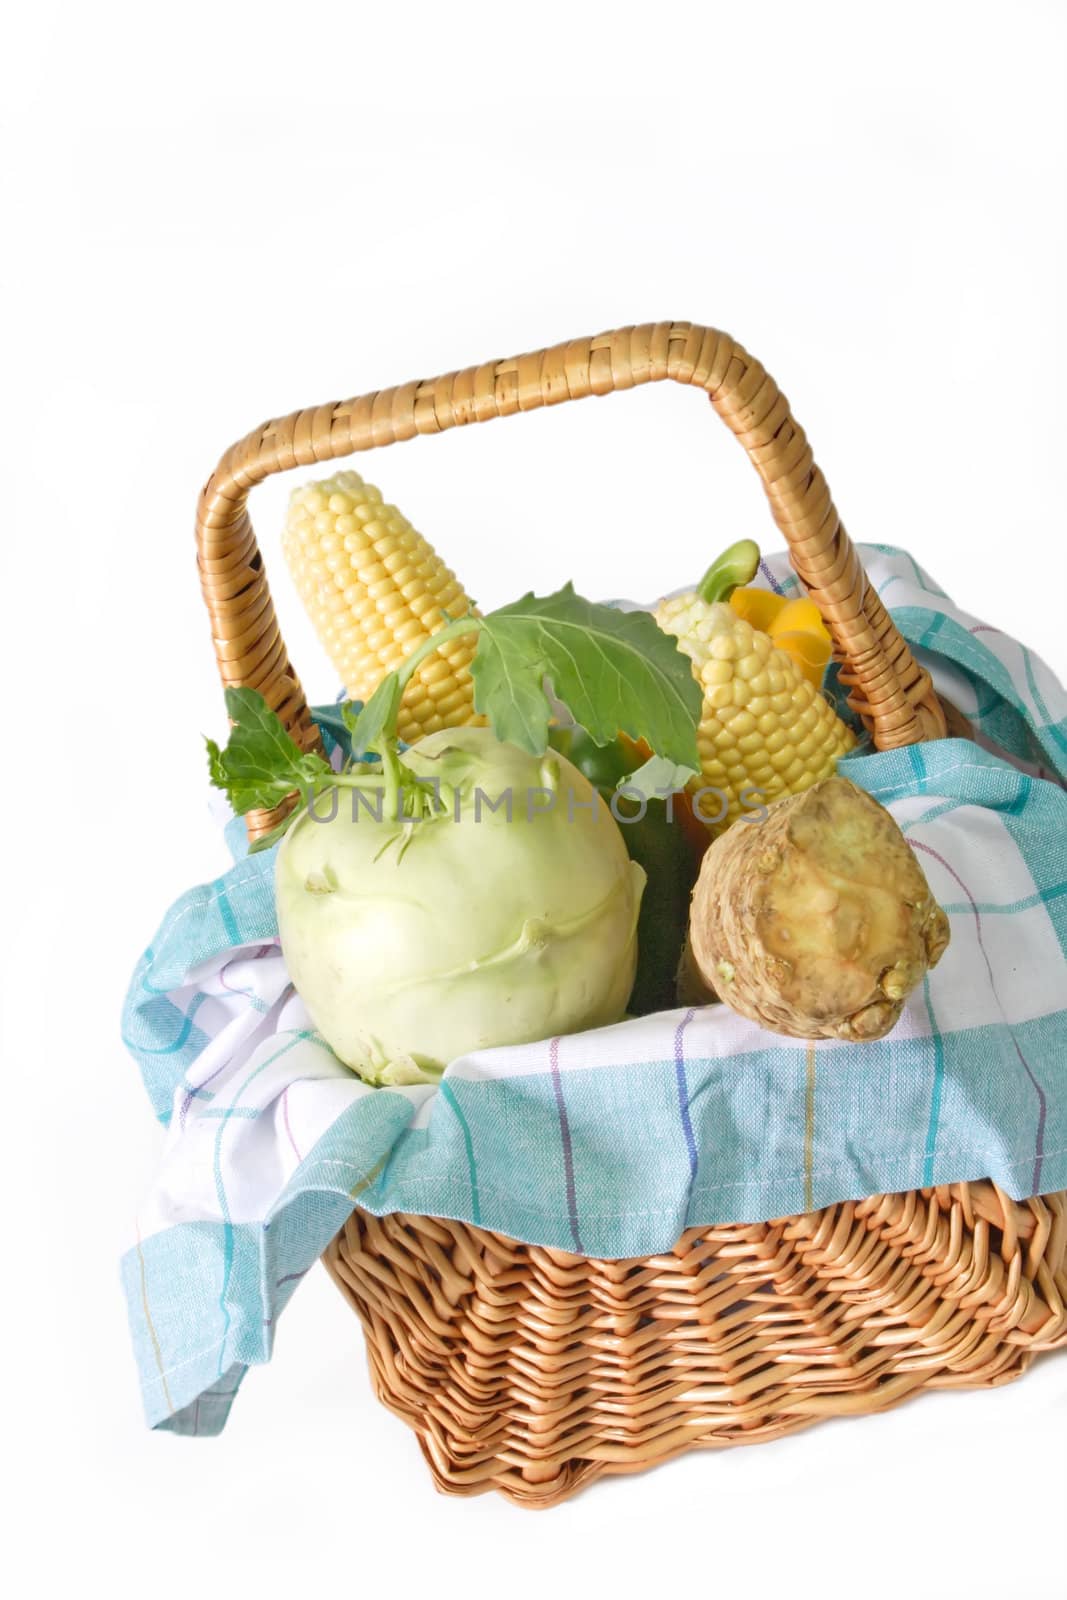 Fresh vegetable in a basket on bright background